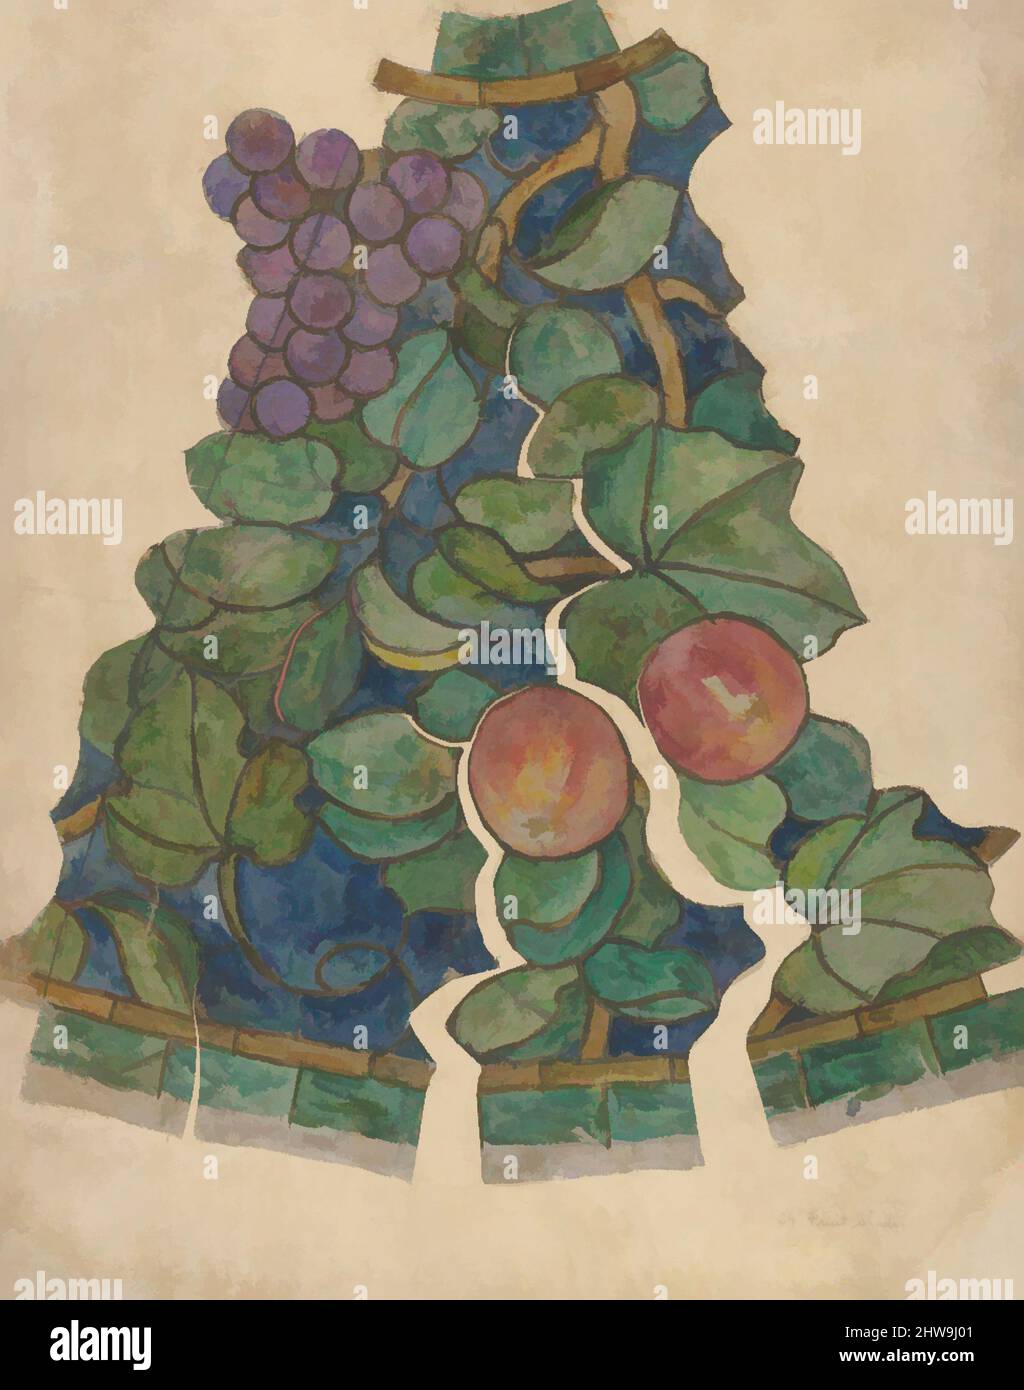 Art inspired by Working drawing for 'Fruit' shade, 1900–1915, Made in New York, United States, American, Watercolor and graphite on linen cloth mounted on off-white wove paper, 15 5/8 x 12 5/8 in. (39.7 x 32.1 cm), Drawings, Possibly Tiffany Glass and Decorating Company (American, 1892, Classic works modernized by Artotop with a splash of modernity. Shapes, color and value, eye-catching visual impact on art. Emotions through freedom of artworks in a contemporary way. A timeless message pursuing a wildly creative new direction. Artists turning to the digital medium and creating the Artotop NFT Stock Photo